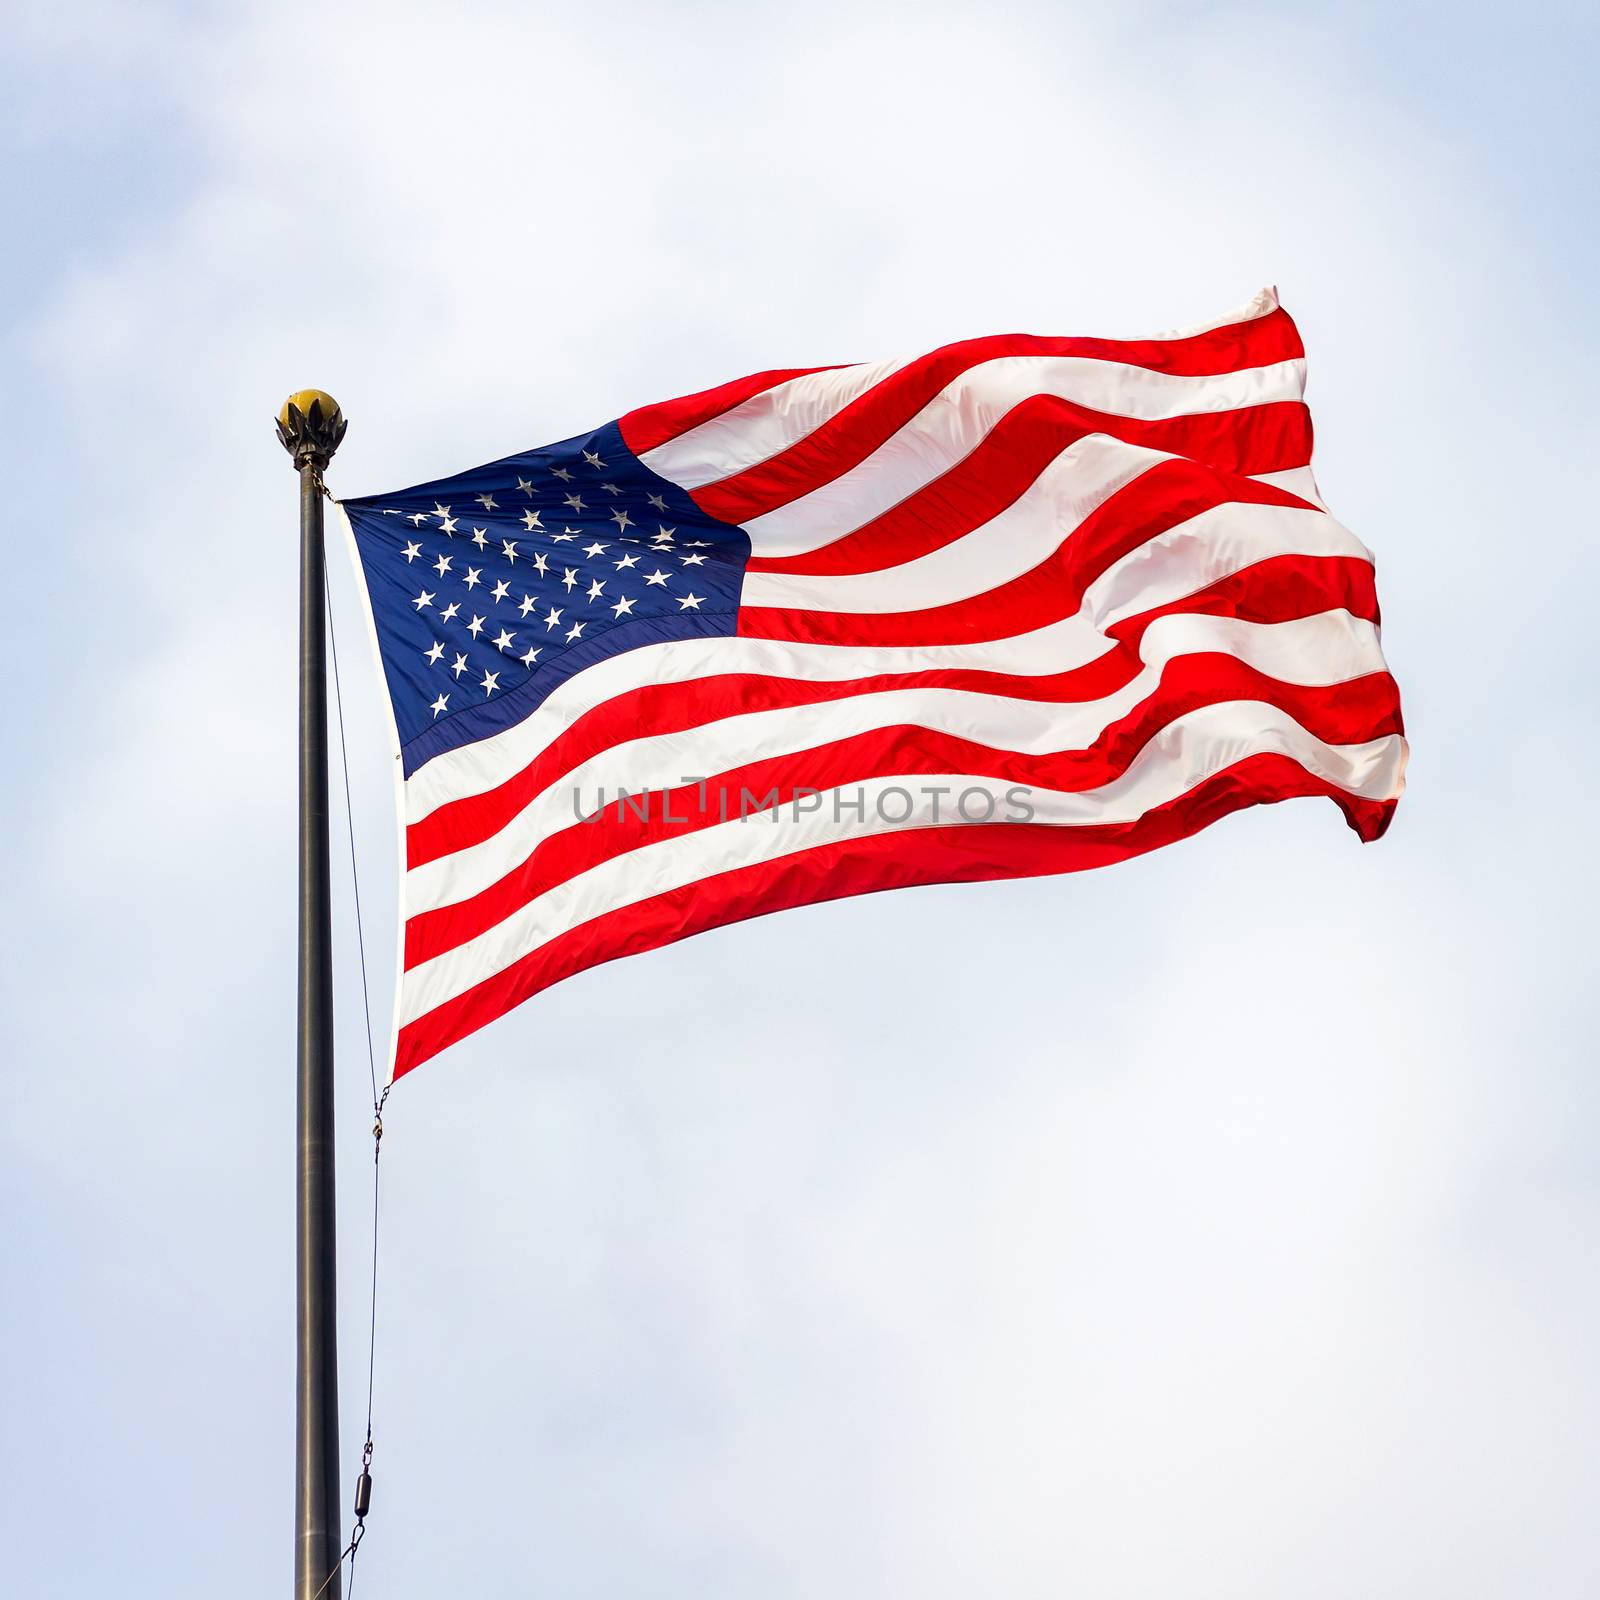 The United States of America flag on a sunny day. by Tanarch